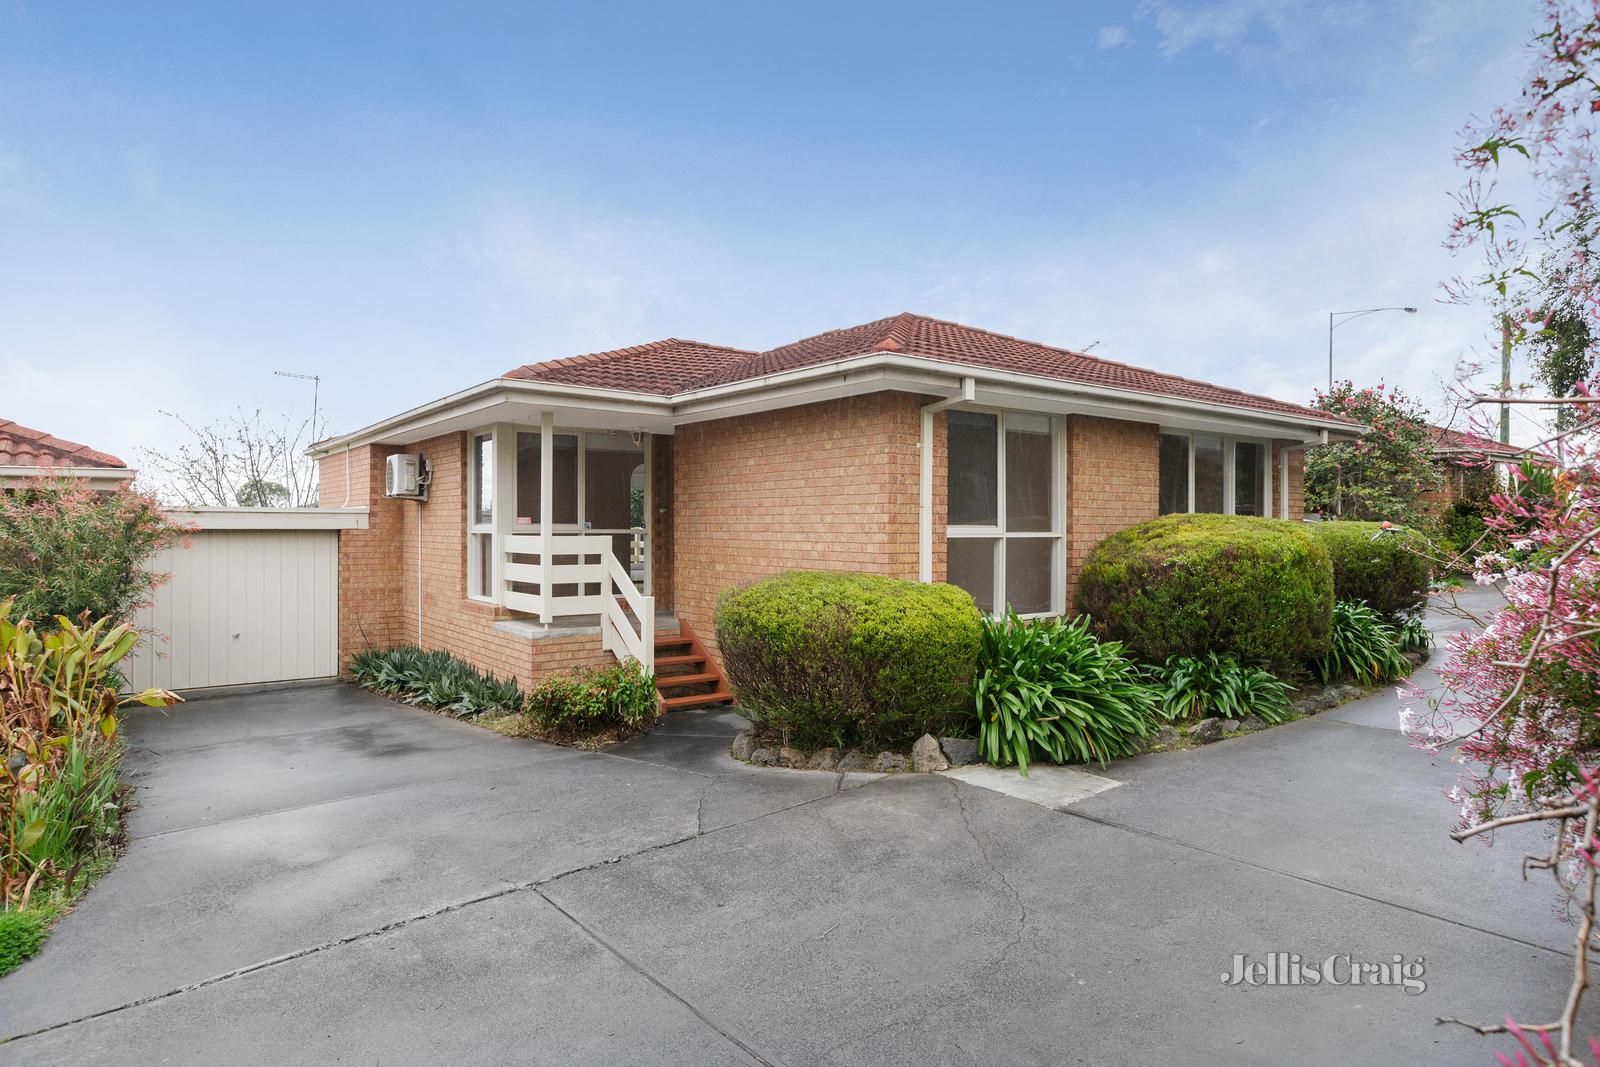 2 bedrooms Apartment / Unit / Flat in 2/120 High Street DONCASTER VIC, 3108